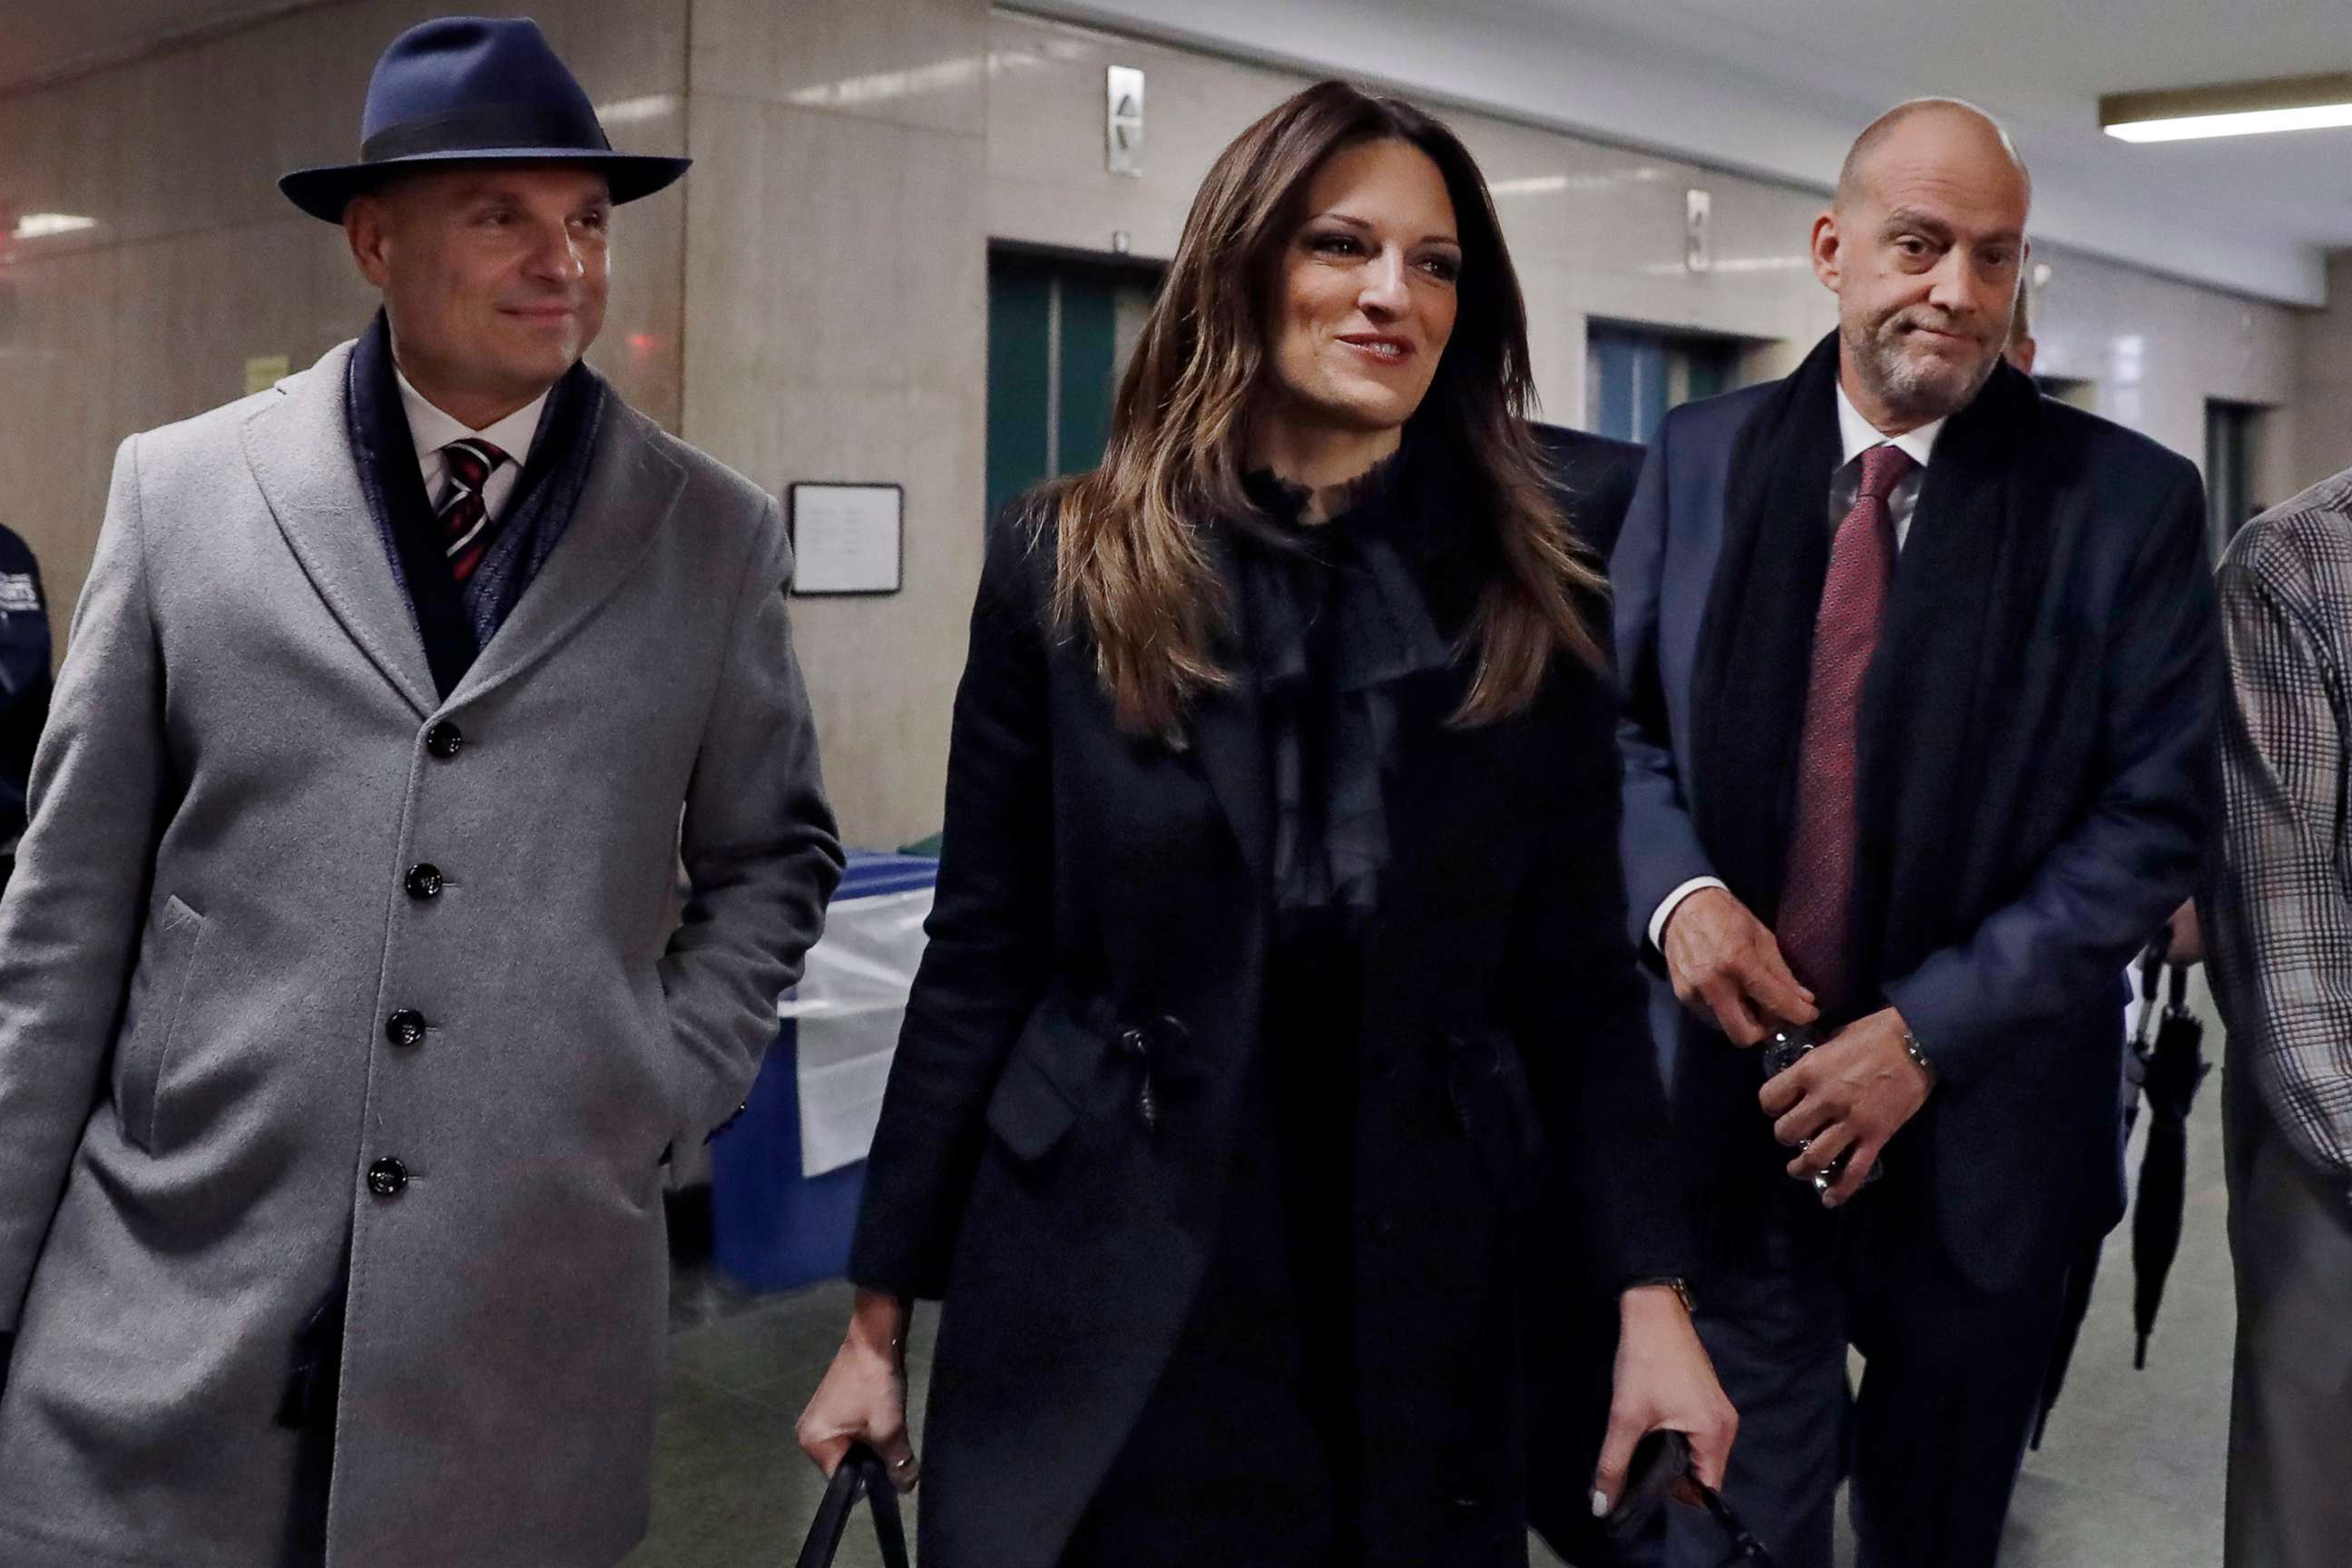 PHOTO: Harvey Weinstein defense attorneys Donna Rotunno and Arthur Aidala, left, arrive at court for  his rape trial, in New York, Feb. 13, 2020.